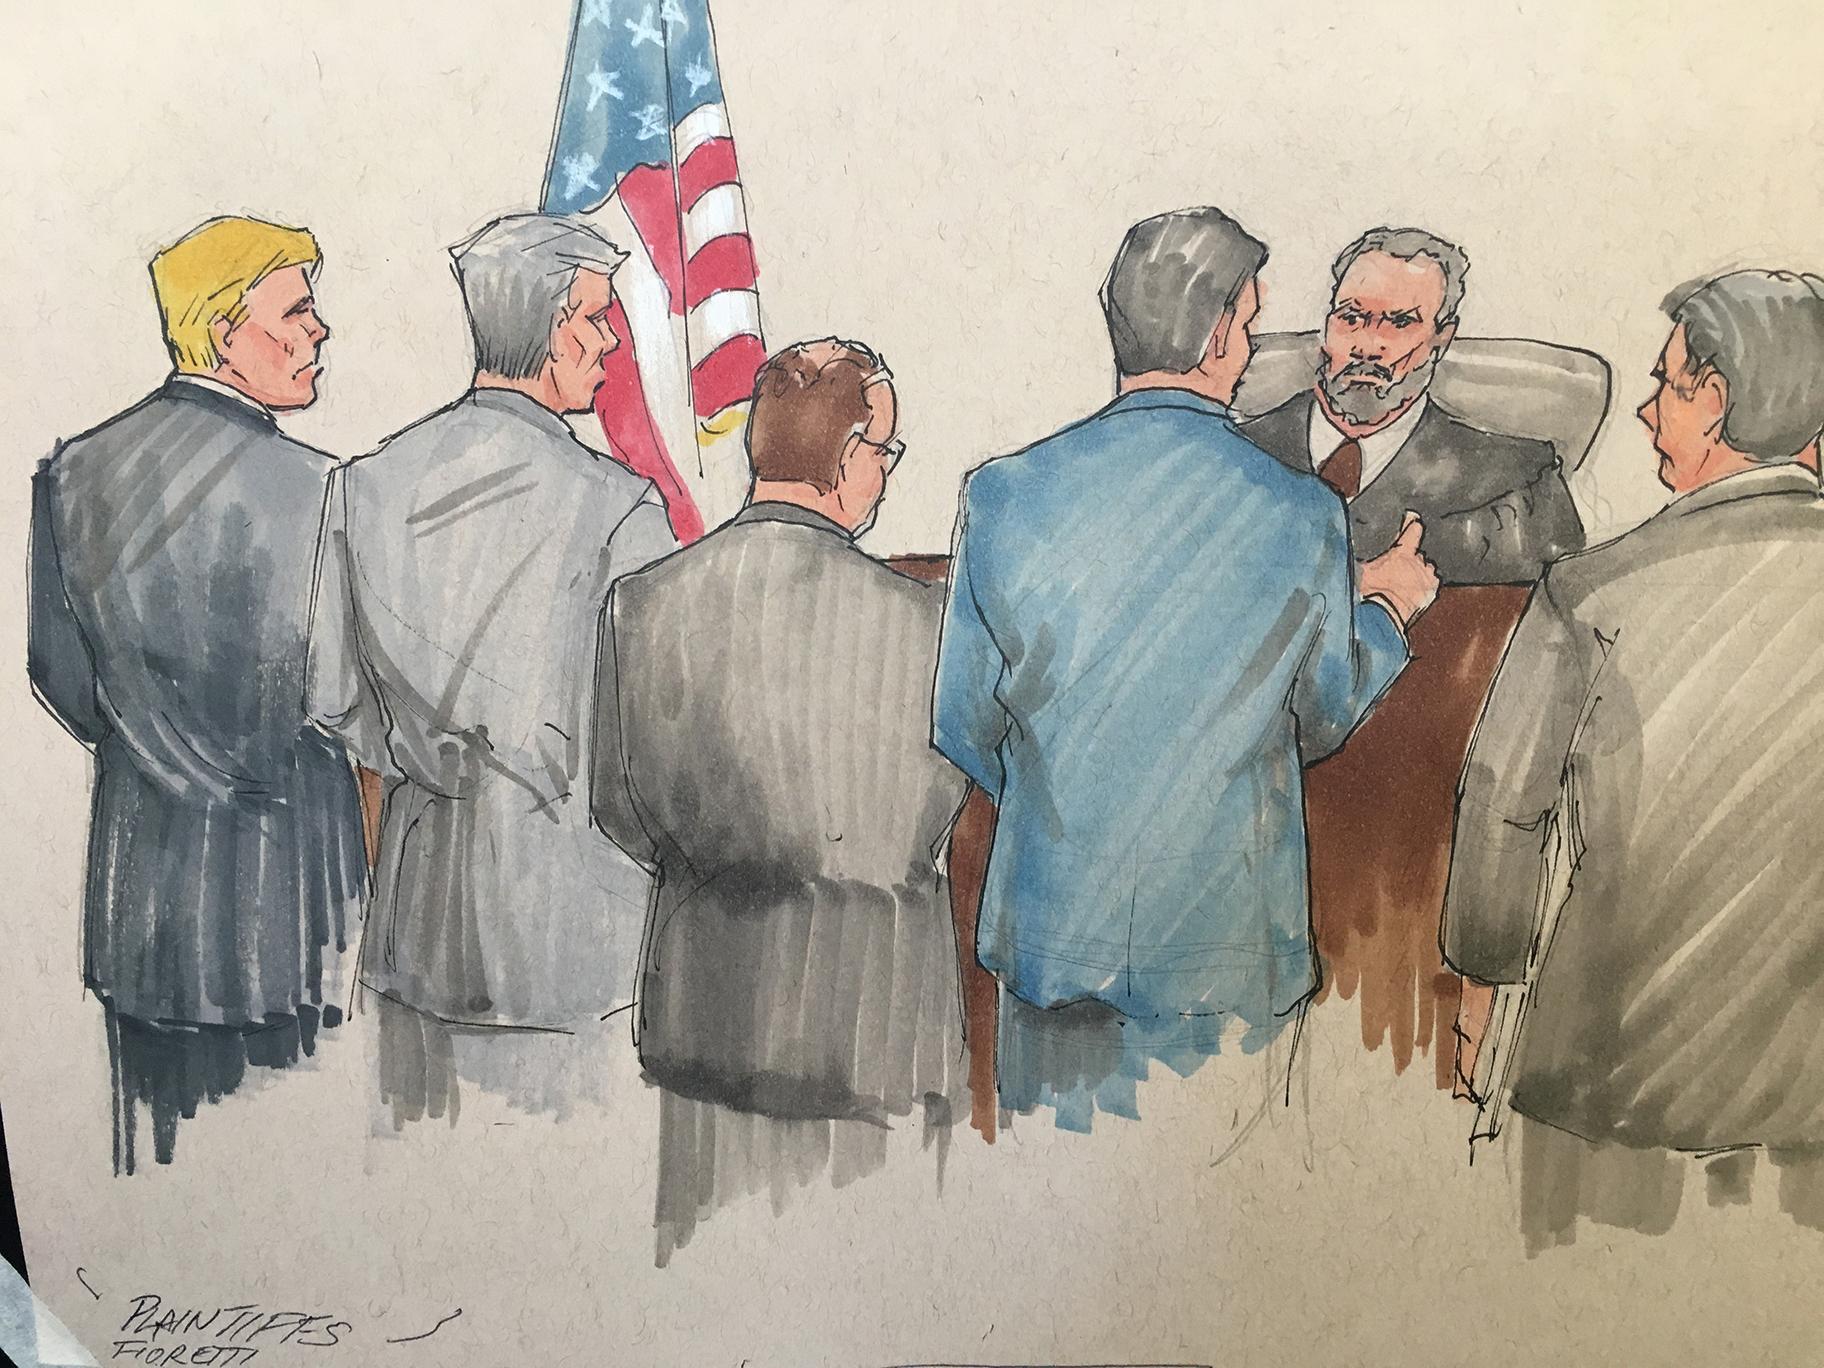 Plaintiffs appear before U.S. District Judge John Robert Blakey on Tuesday, June 11, 2019 to discuss a suit aiming to halt construction of the Obama Presidential Center in Jackson Park. (Courtroom sketch by Tom Gianni)